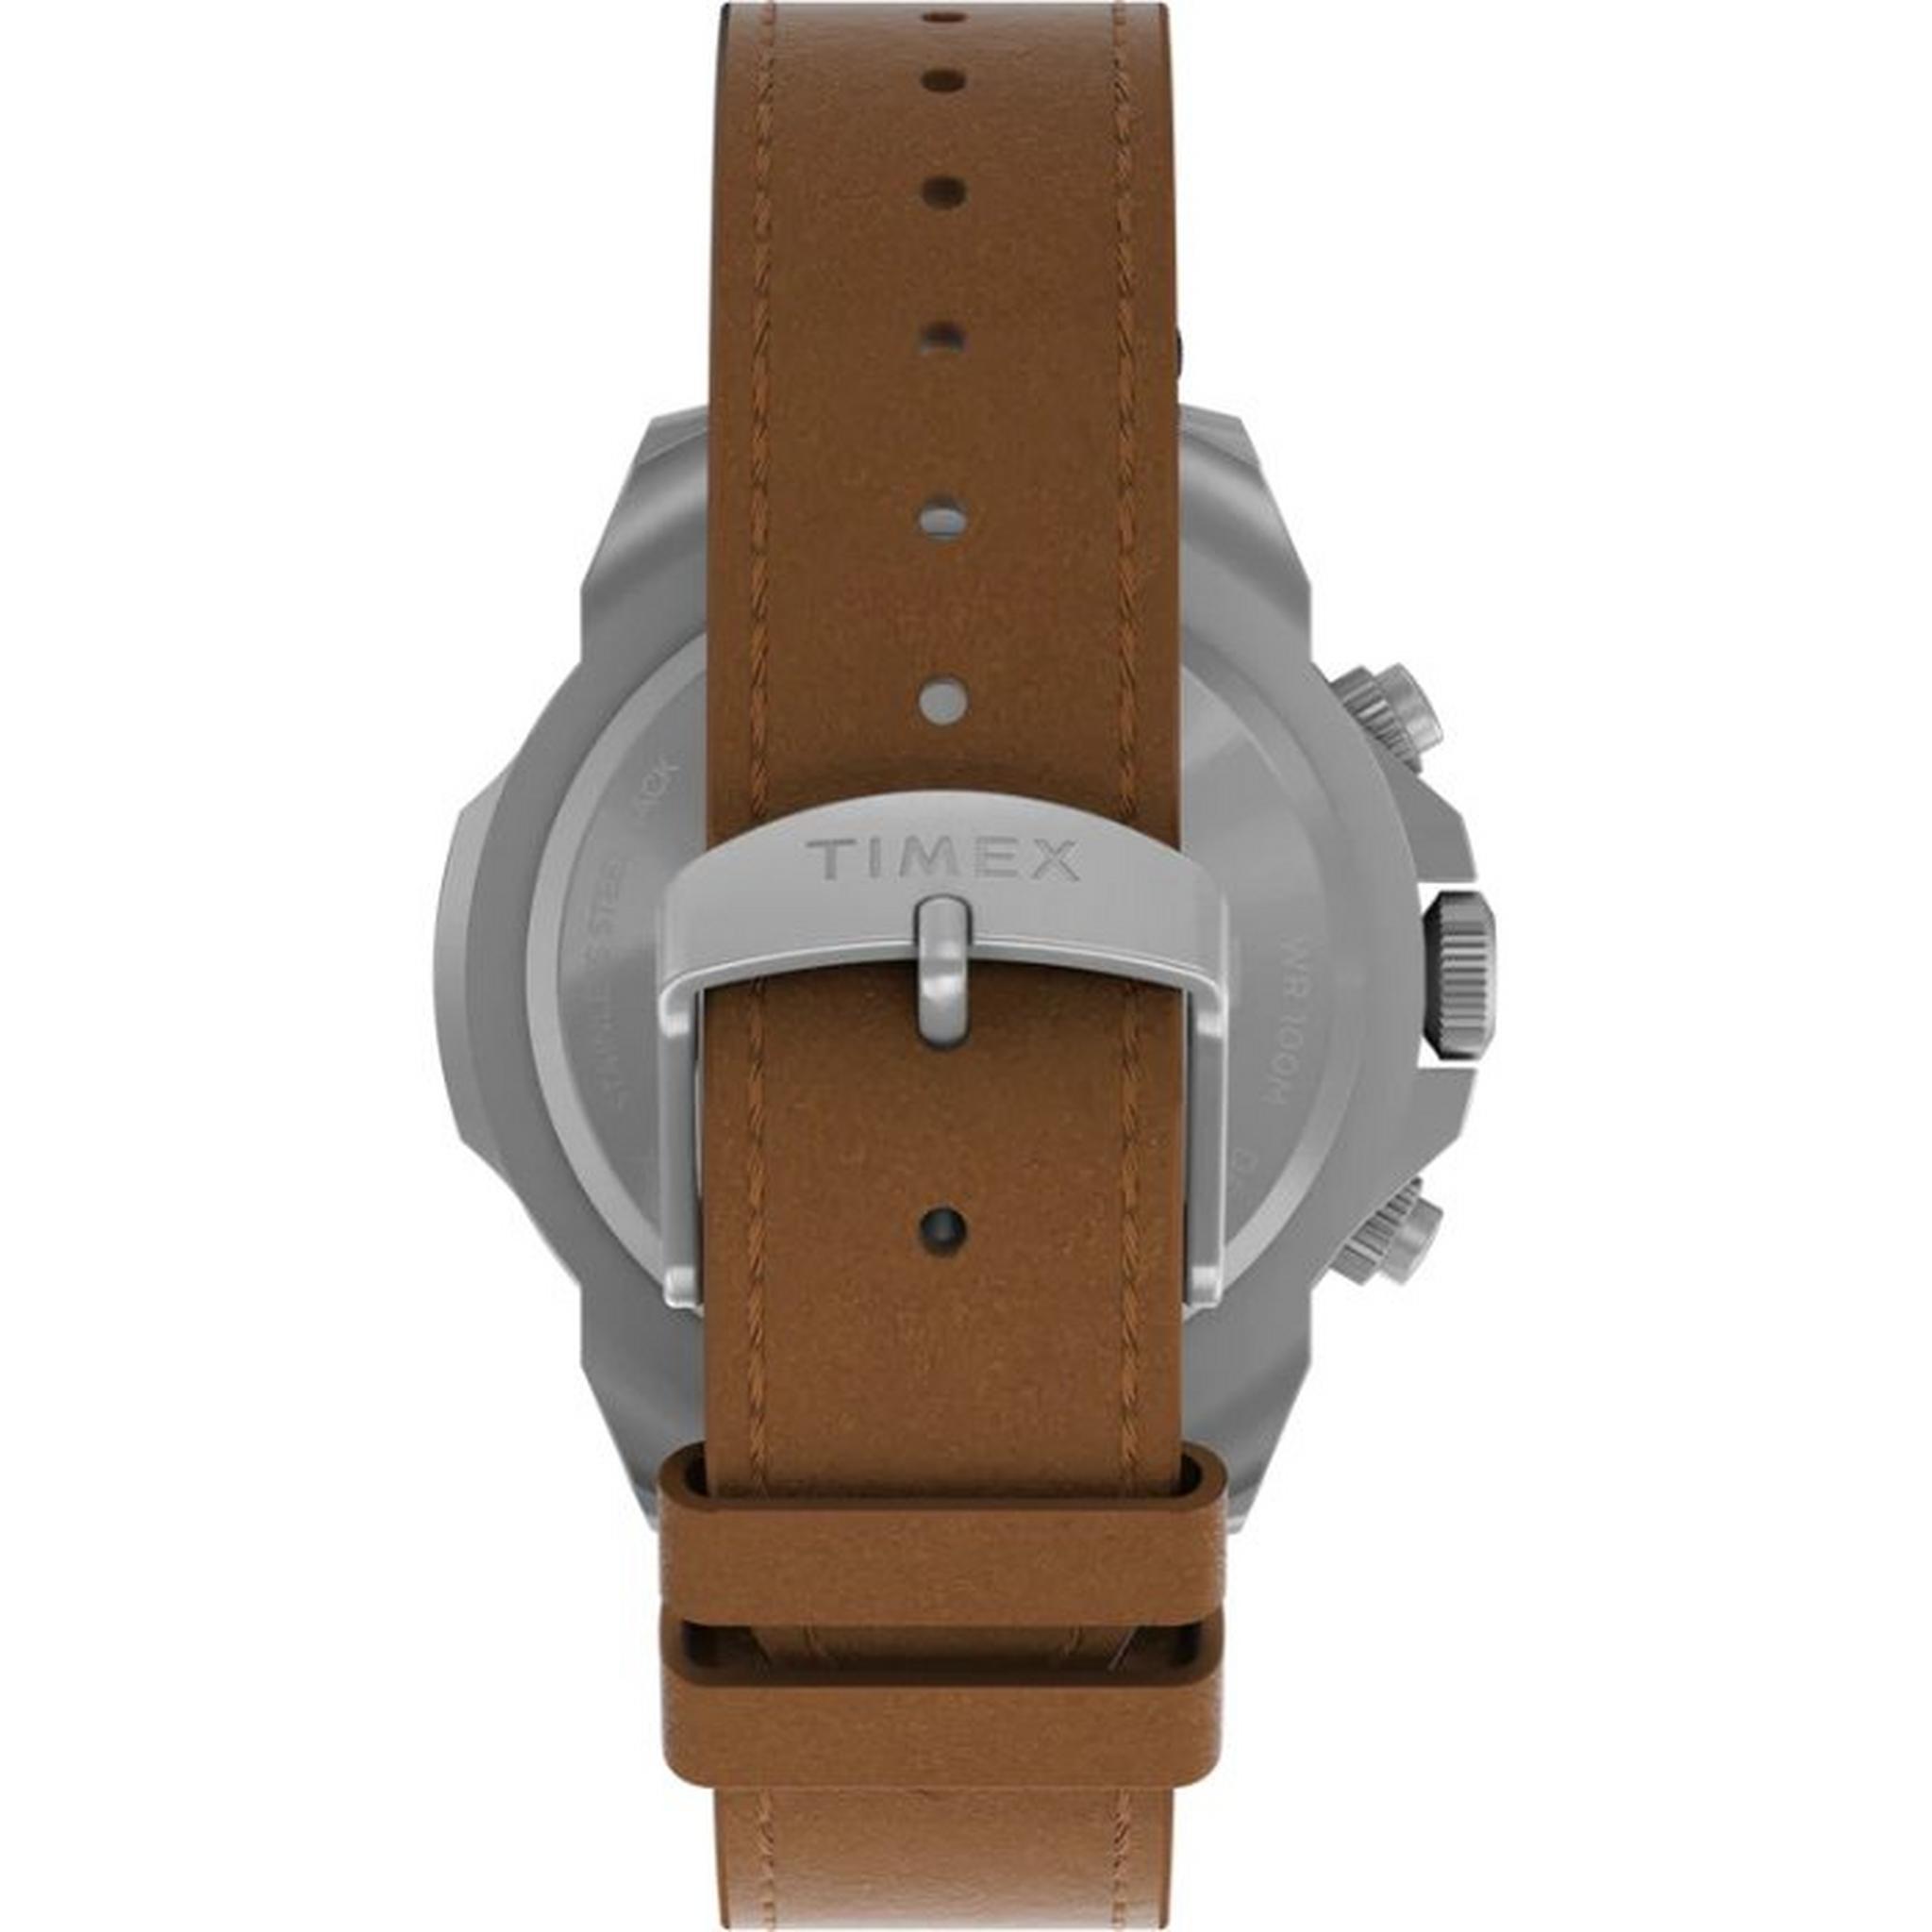 Timex Expedition Men’s Watch, 42mm, Leather Strap, Analog, TW2W16300 – Tan